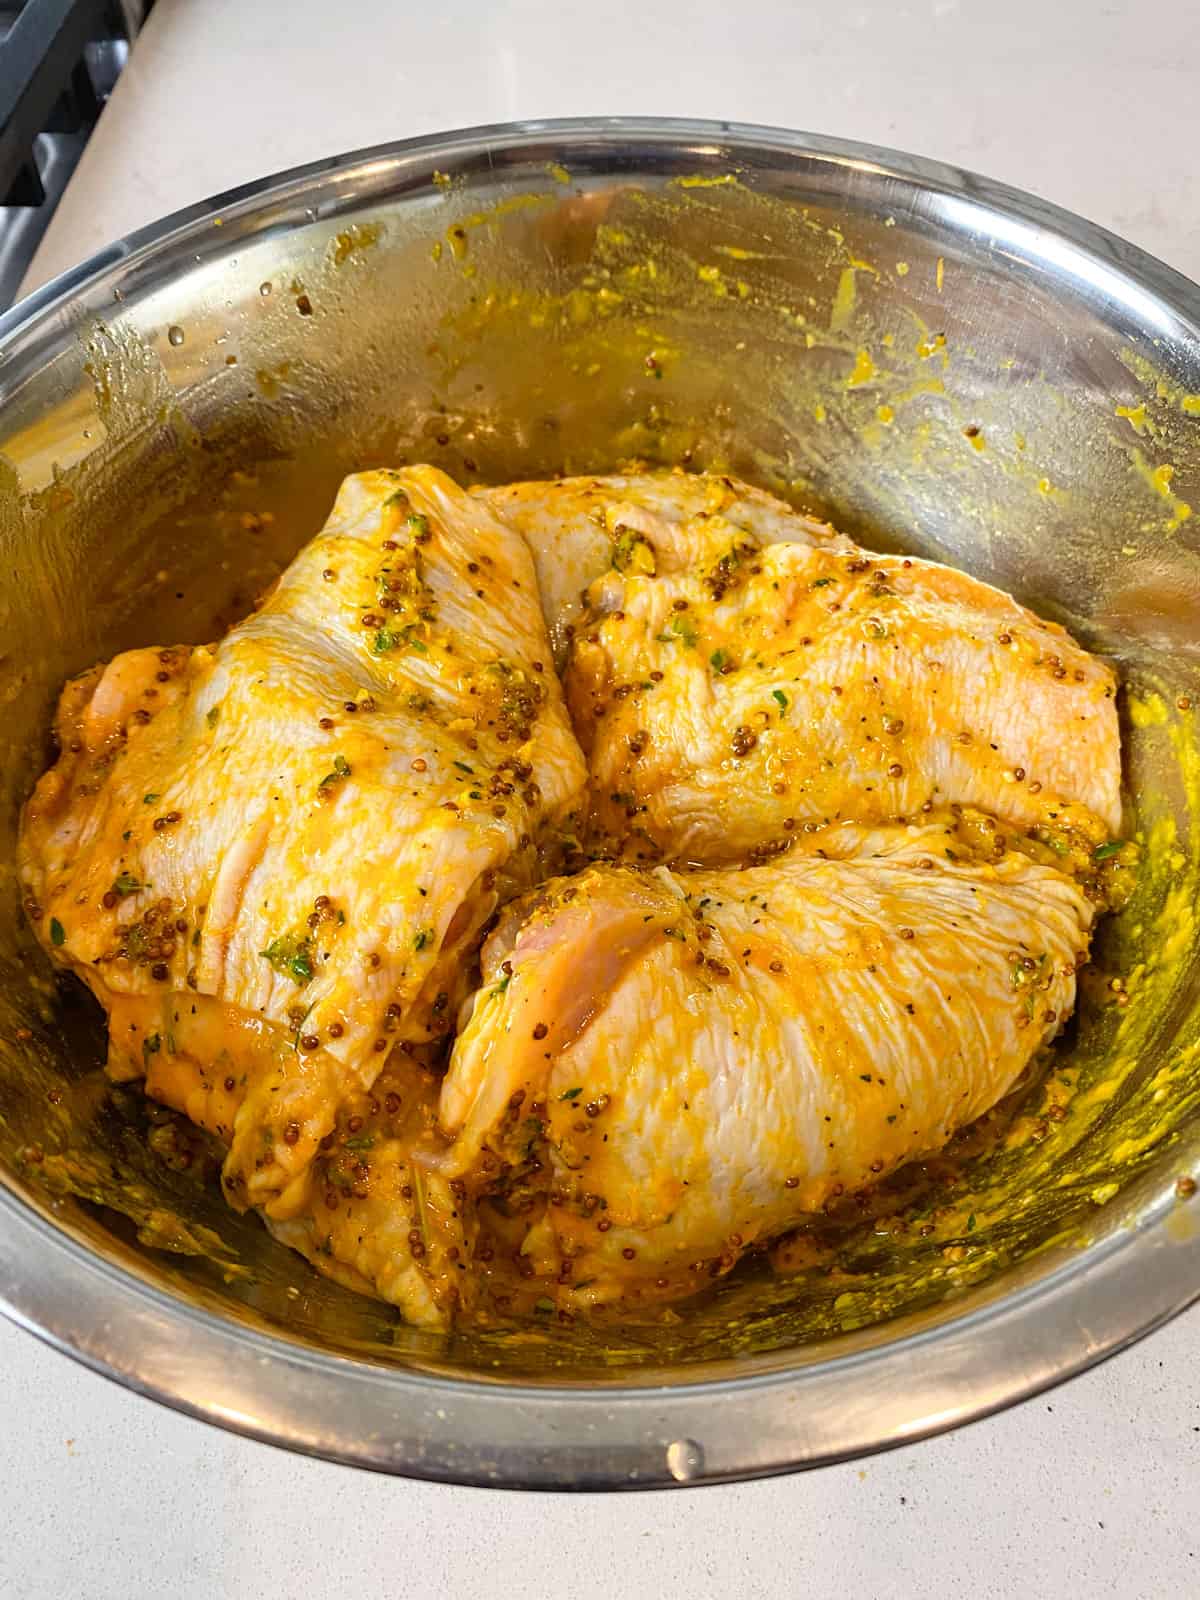 Add bone in and skin on chicken thighs to the turmeric citrus marinade and toss so the marinade is evenly coated all over the chicken.